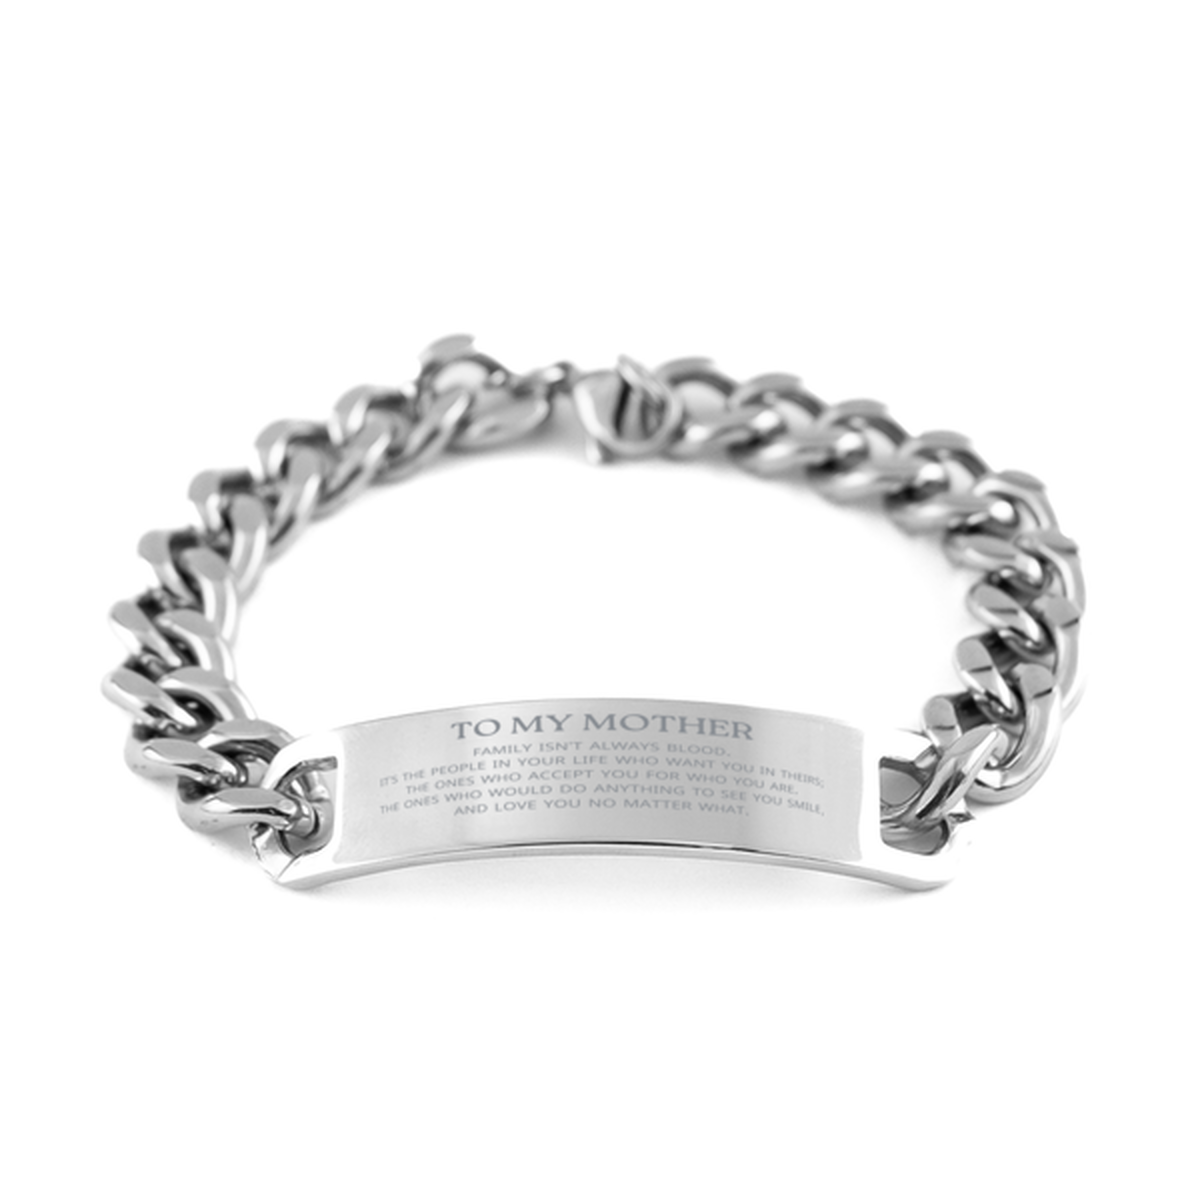 To My Mother Gifts, Family isn't always blood, Mother Cuban Chain Stainless Steel Bracelet, Birthday Christmas Unique Present For Mother